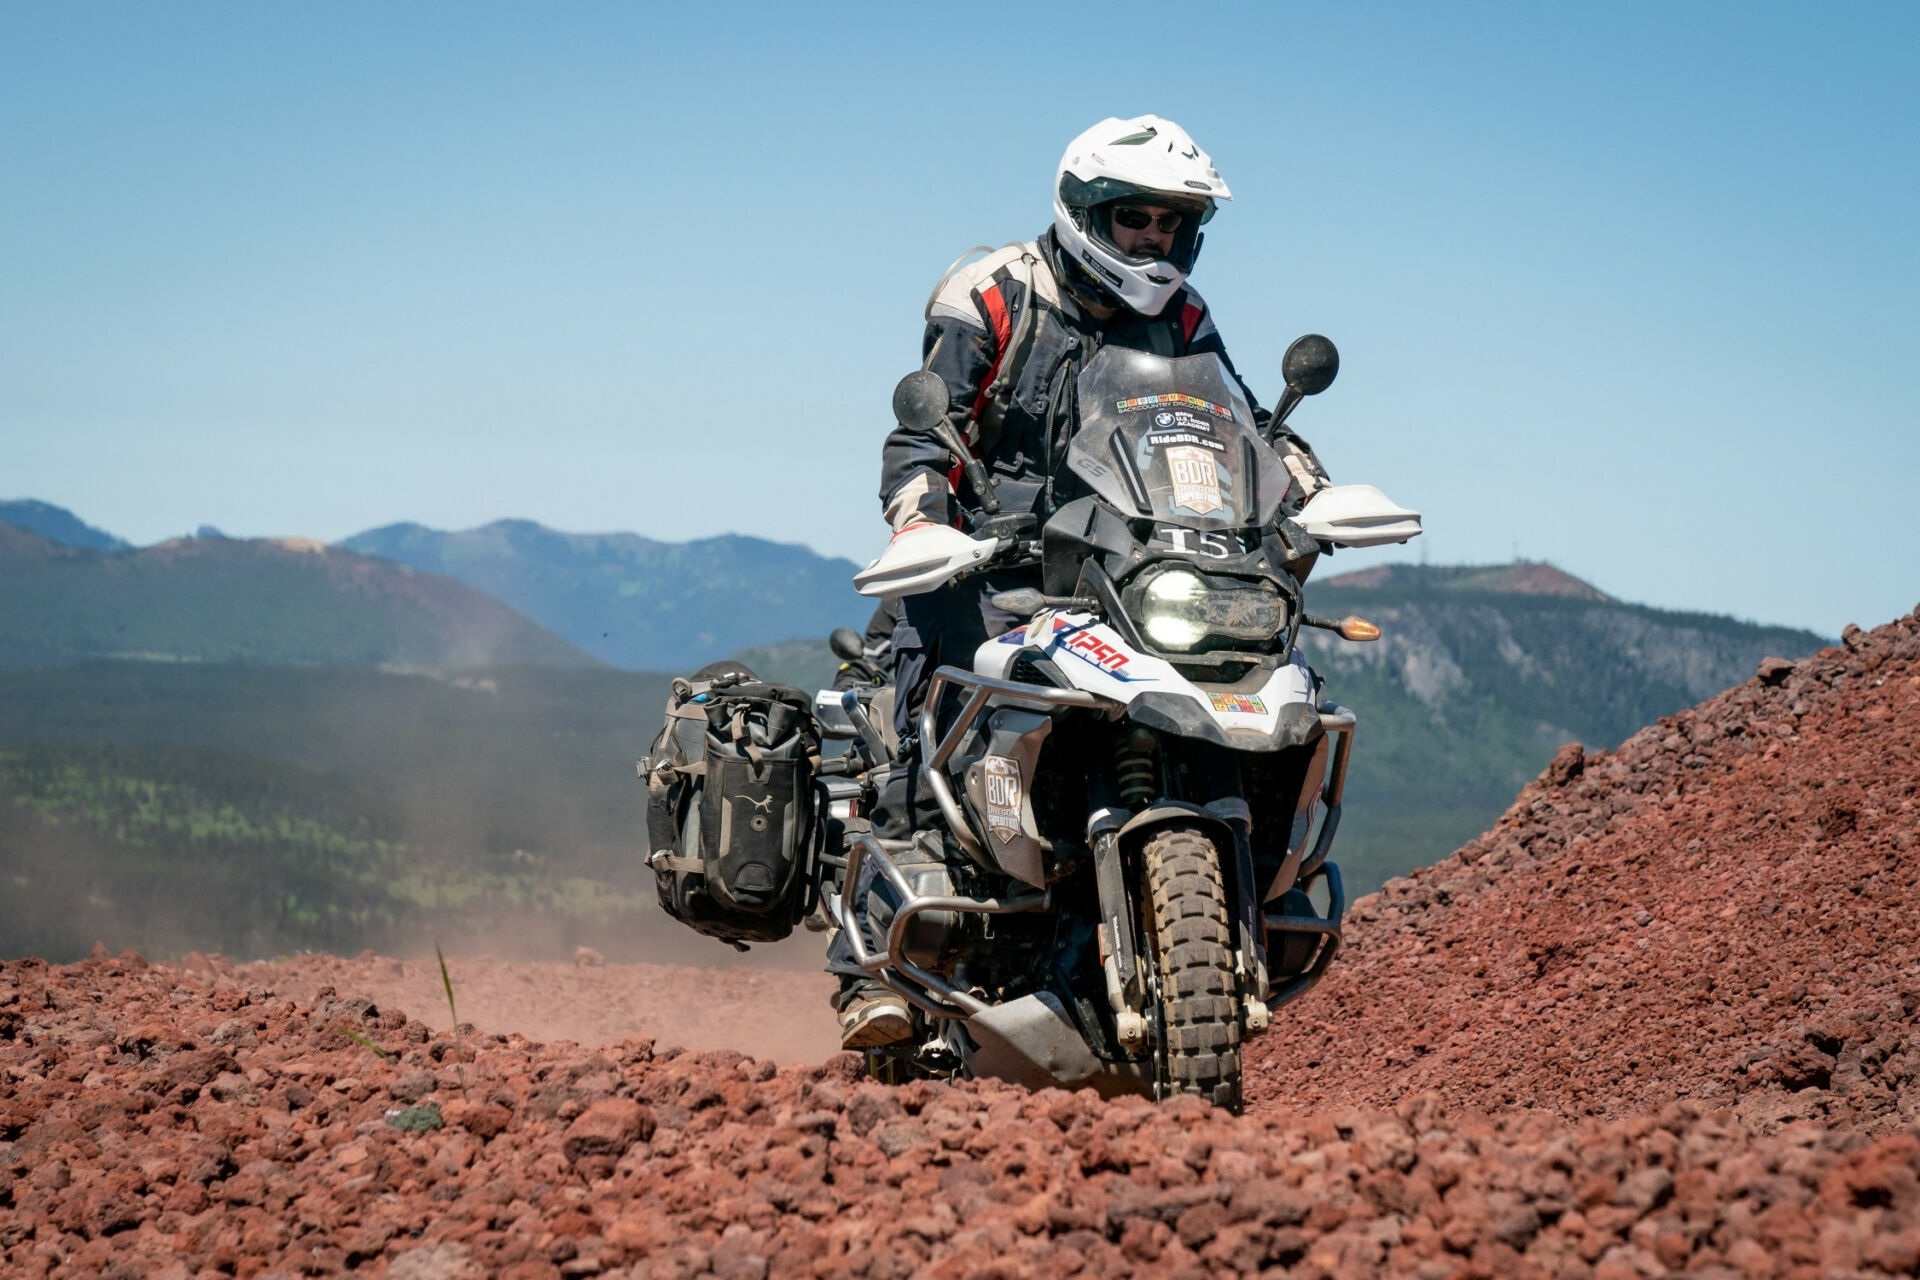 The R 1250 GS and R 1250 GS Adventure continue to be BMW Motorrad's best sellers worldwide. Photo courtesy BMW Motorrad.